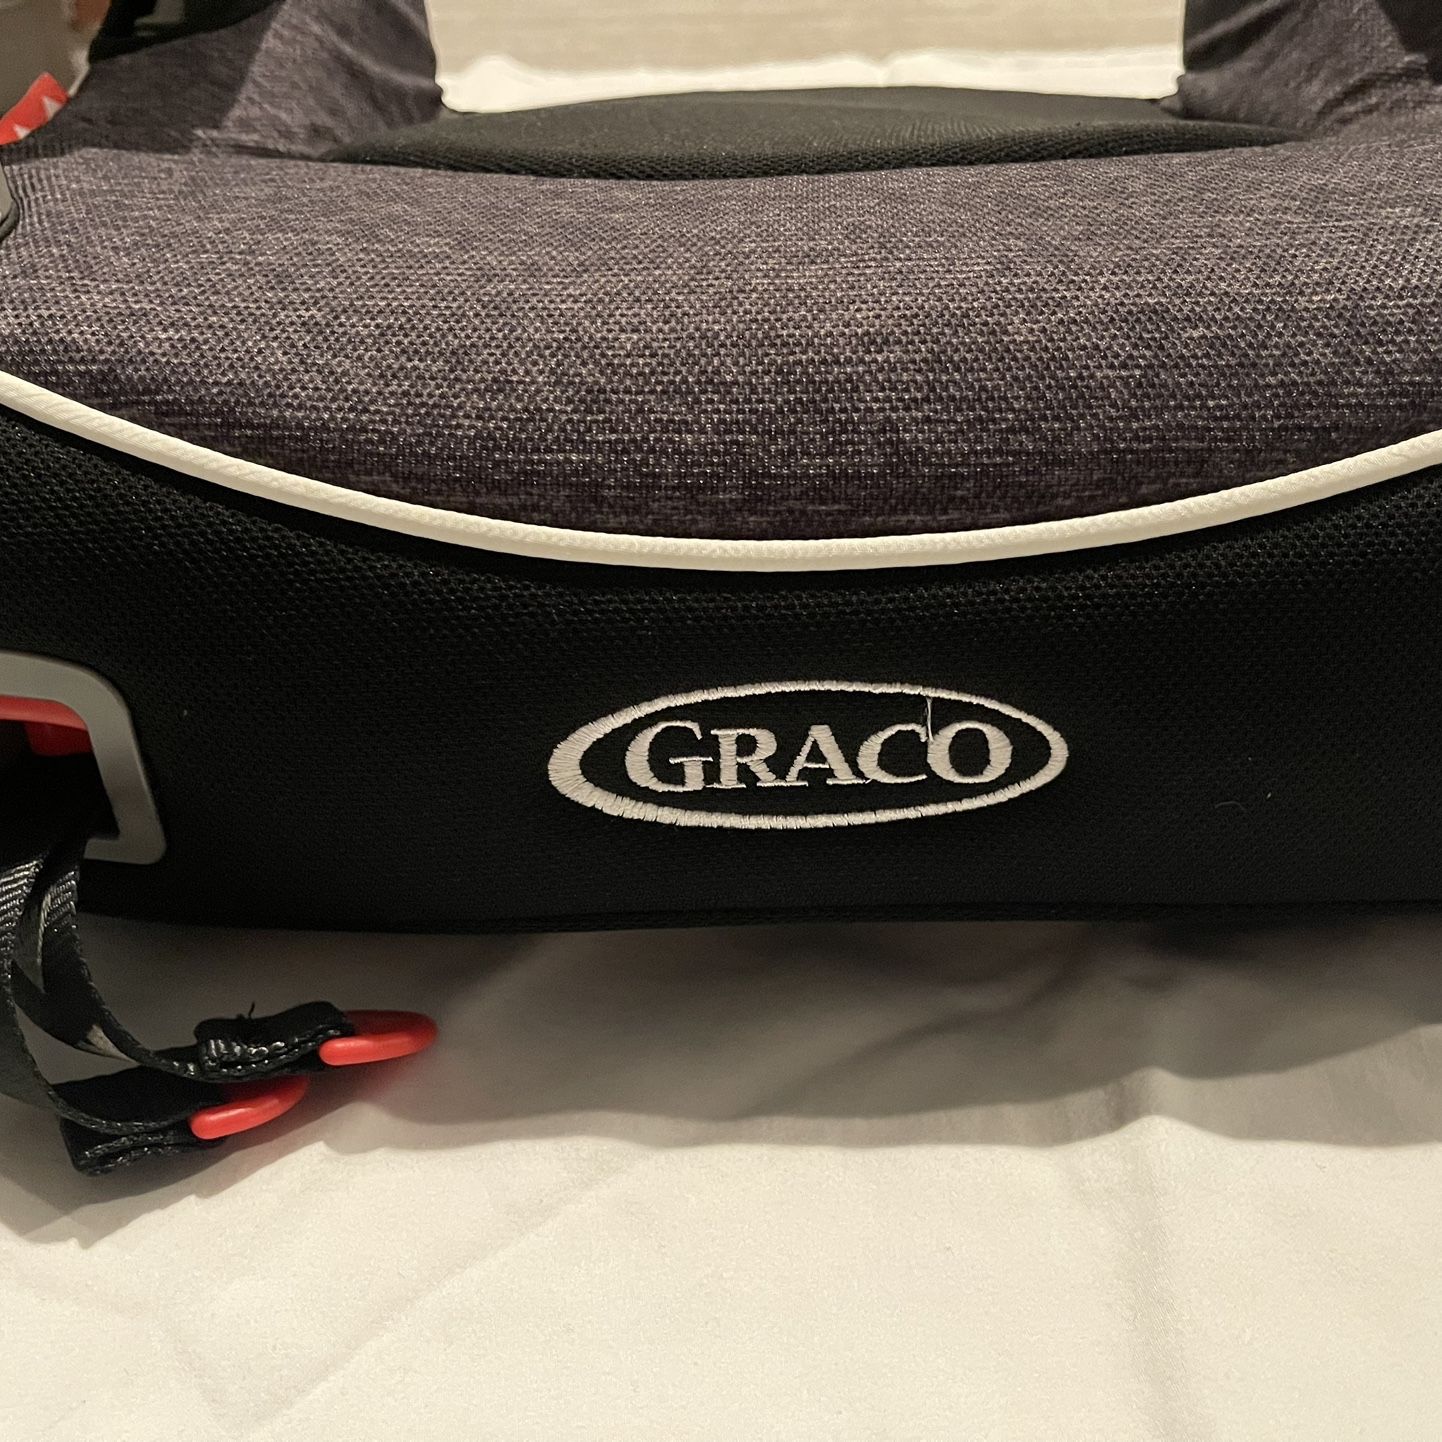 (2) Graco Turbobooster Backless Seats with Latch